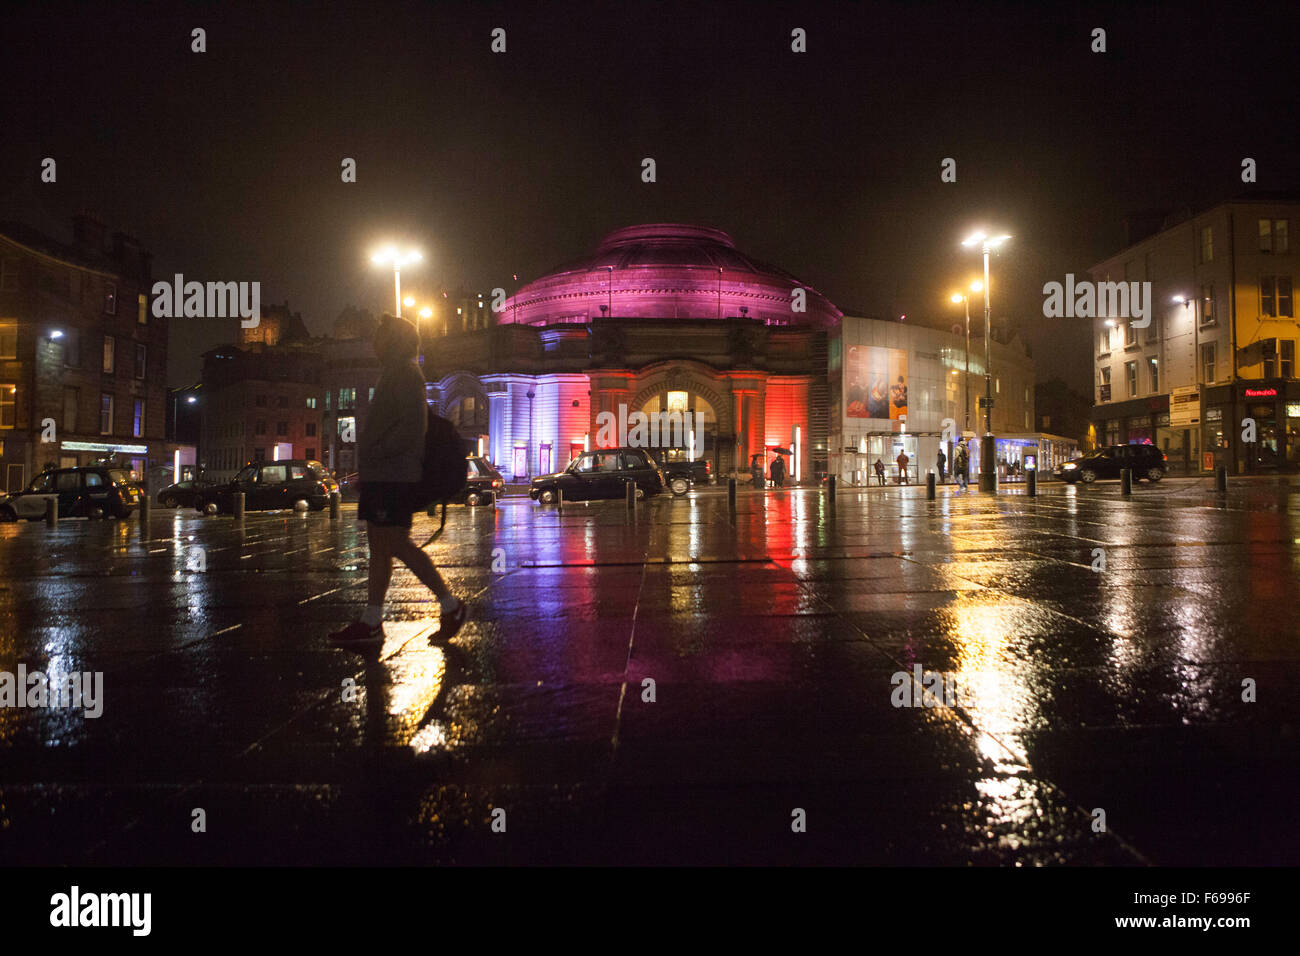 Edinburgh, UK. 14 November. Scotland Capital turned Red, White and Blue in Usher Hall. The colors of the French. The aim to show solidarity with victims of the Paris terror attacks. Pako Mera/Alamy Live News. Stock Photo